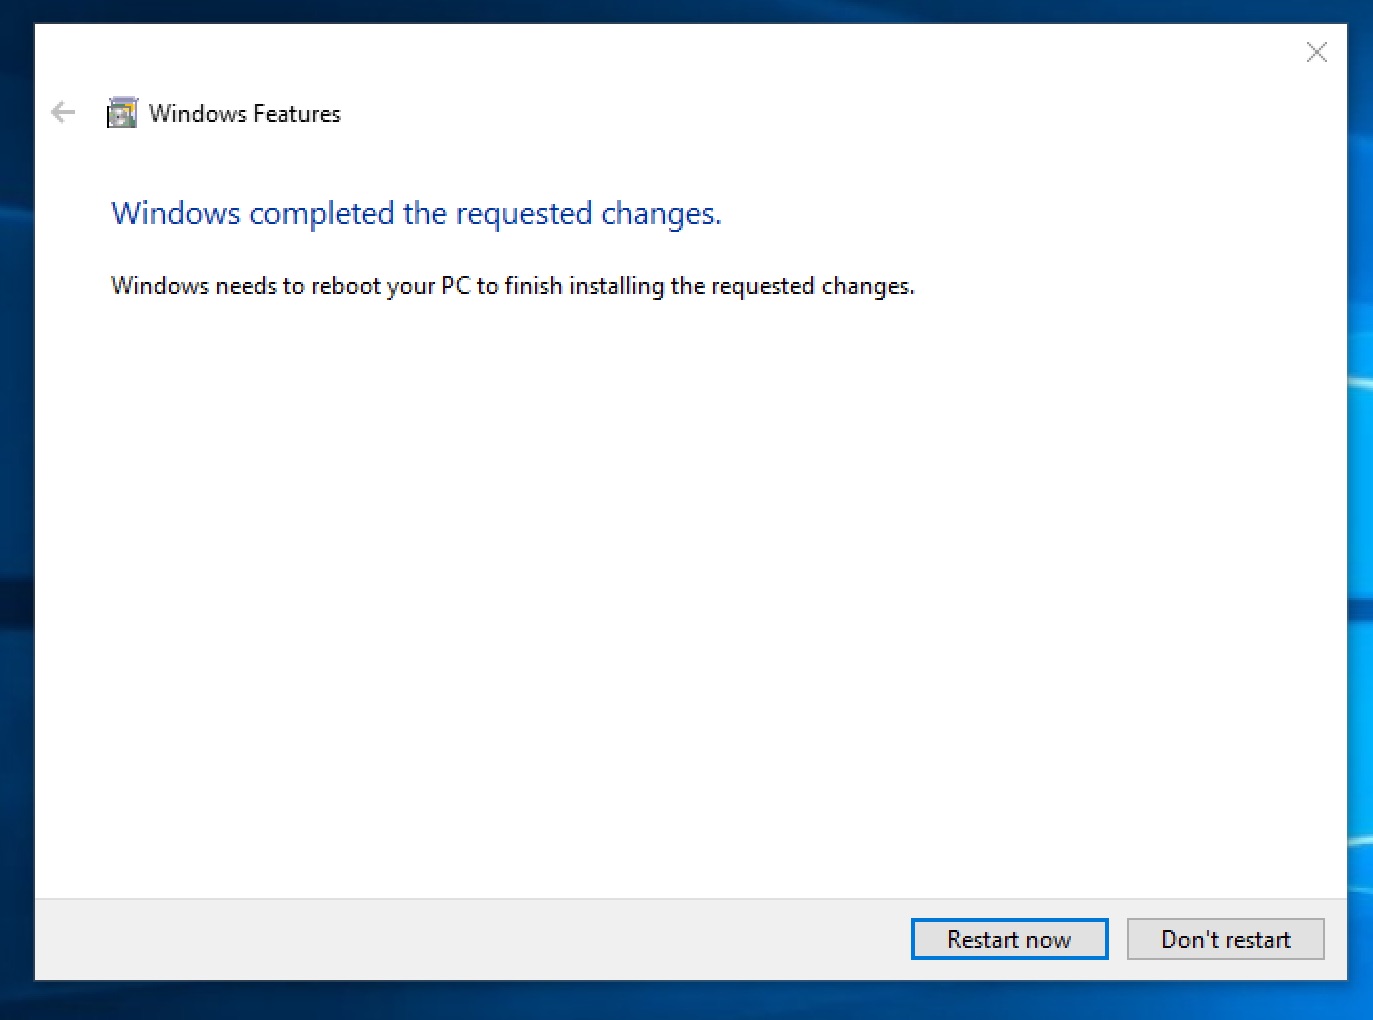 Windows completed the requested changes. Restart